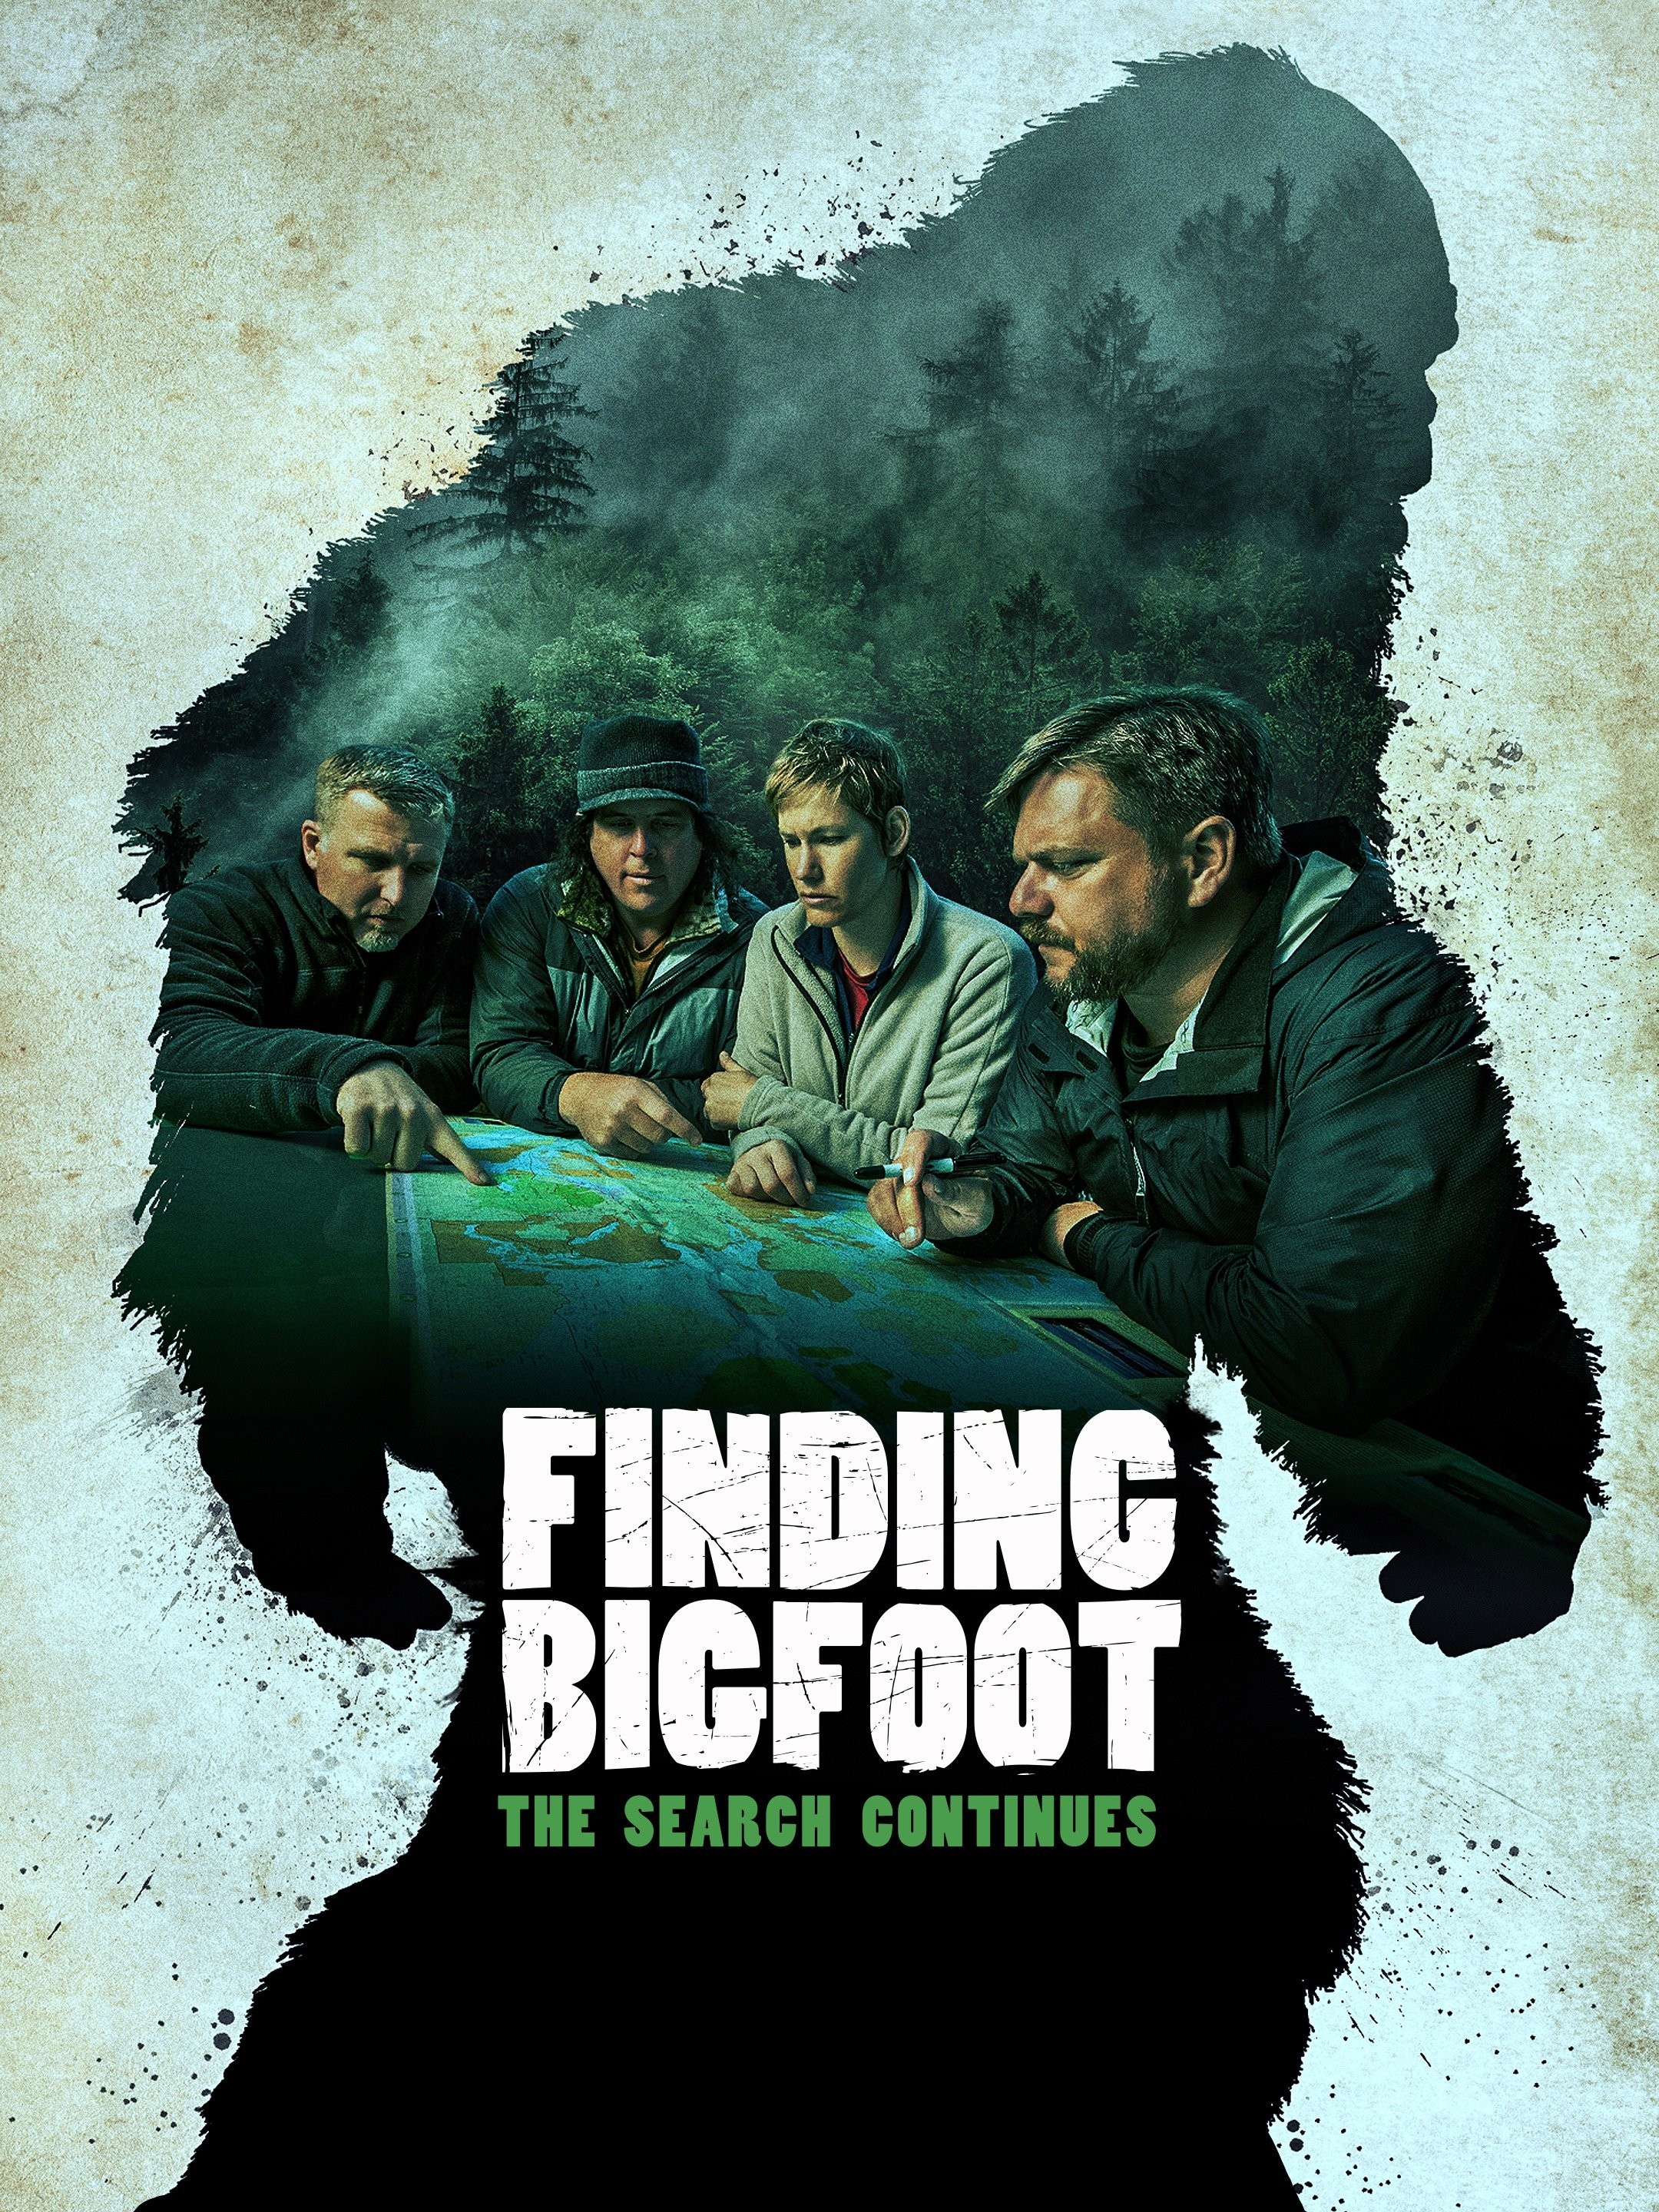 Finding Bigfoot: The Search Continues